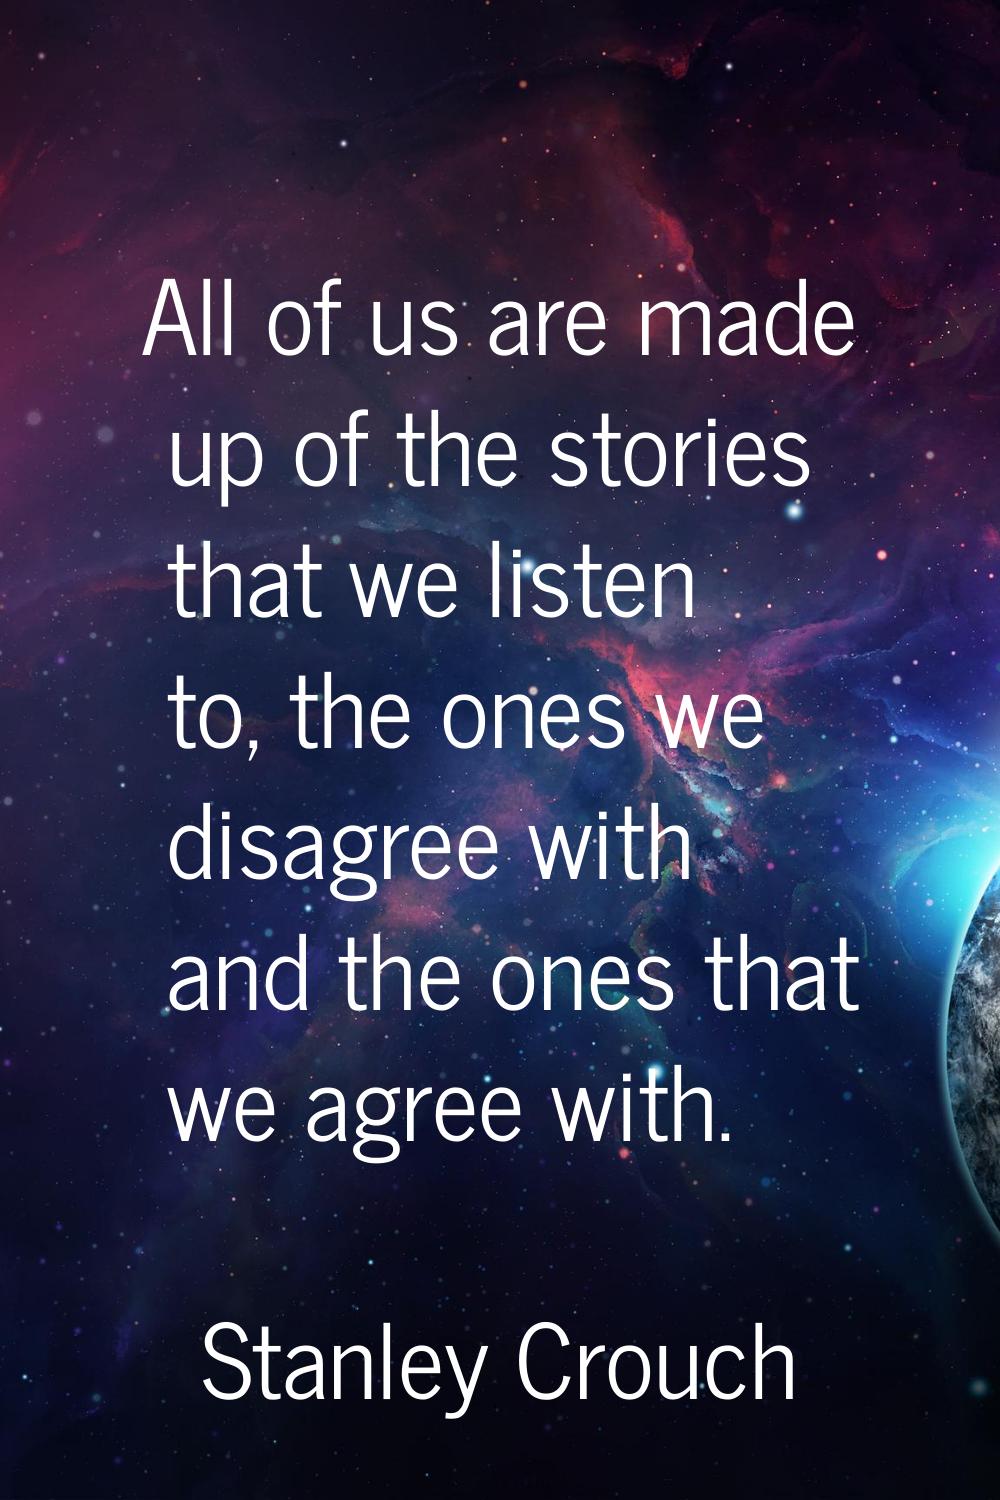 All of us are made up of the stories that we listen to, the ones we disagree with and the ones that